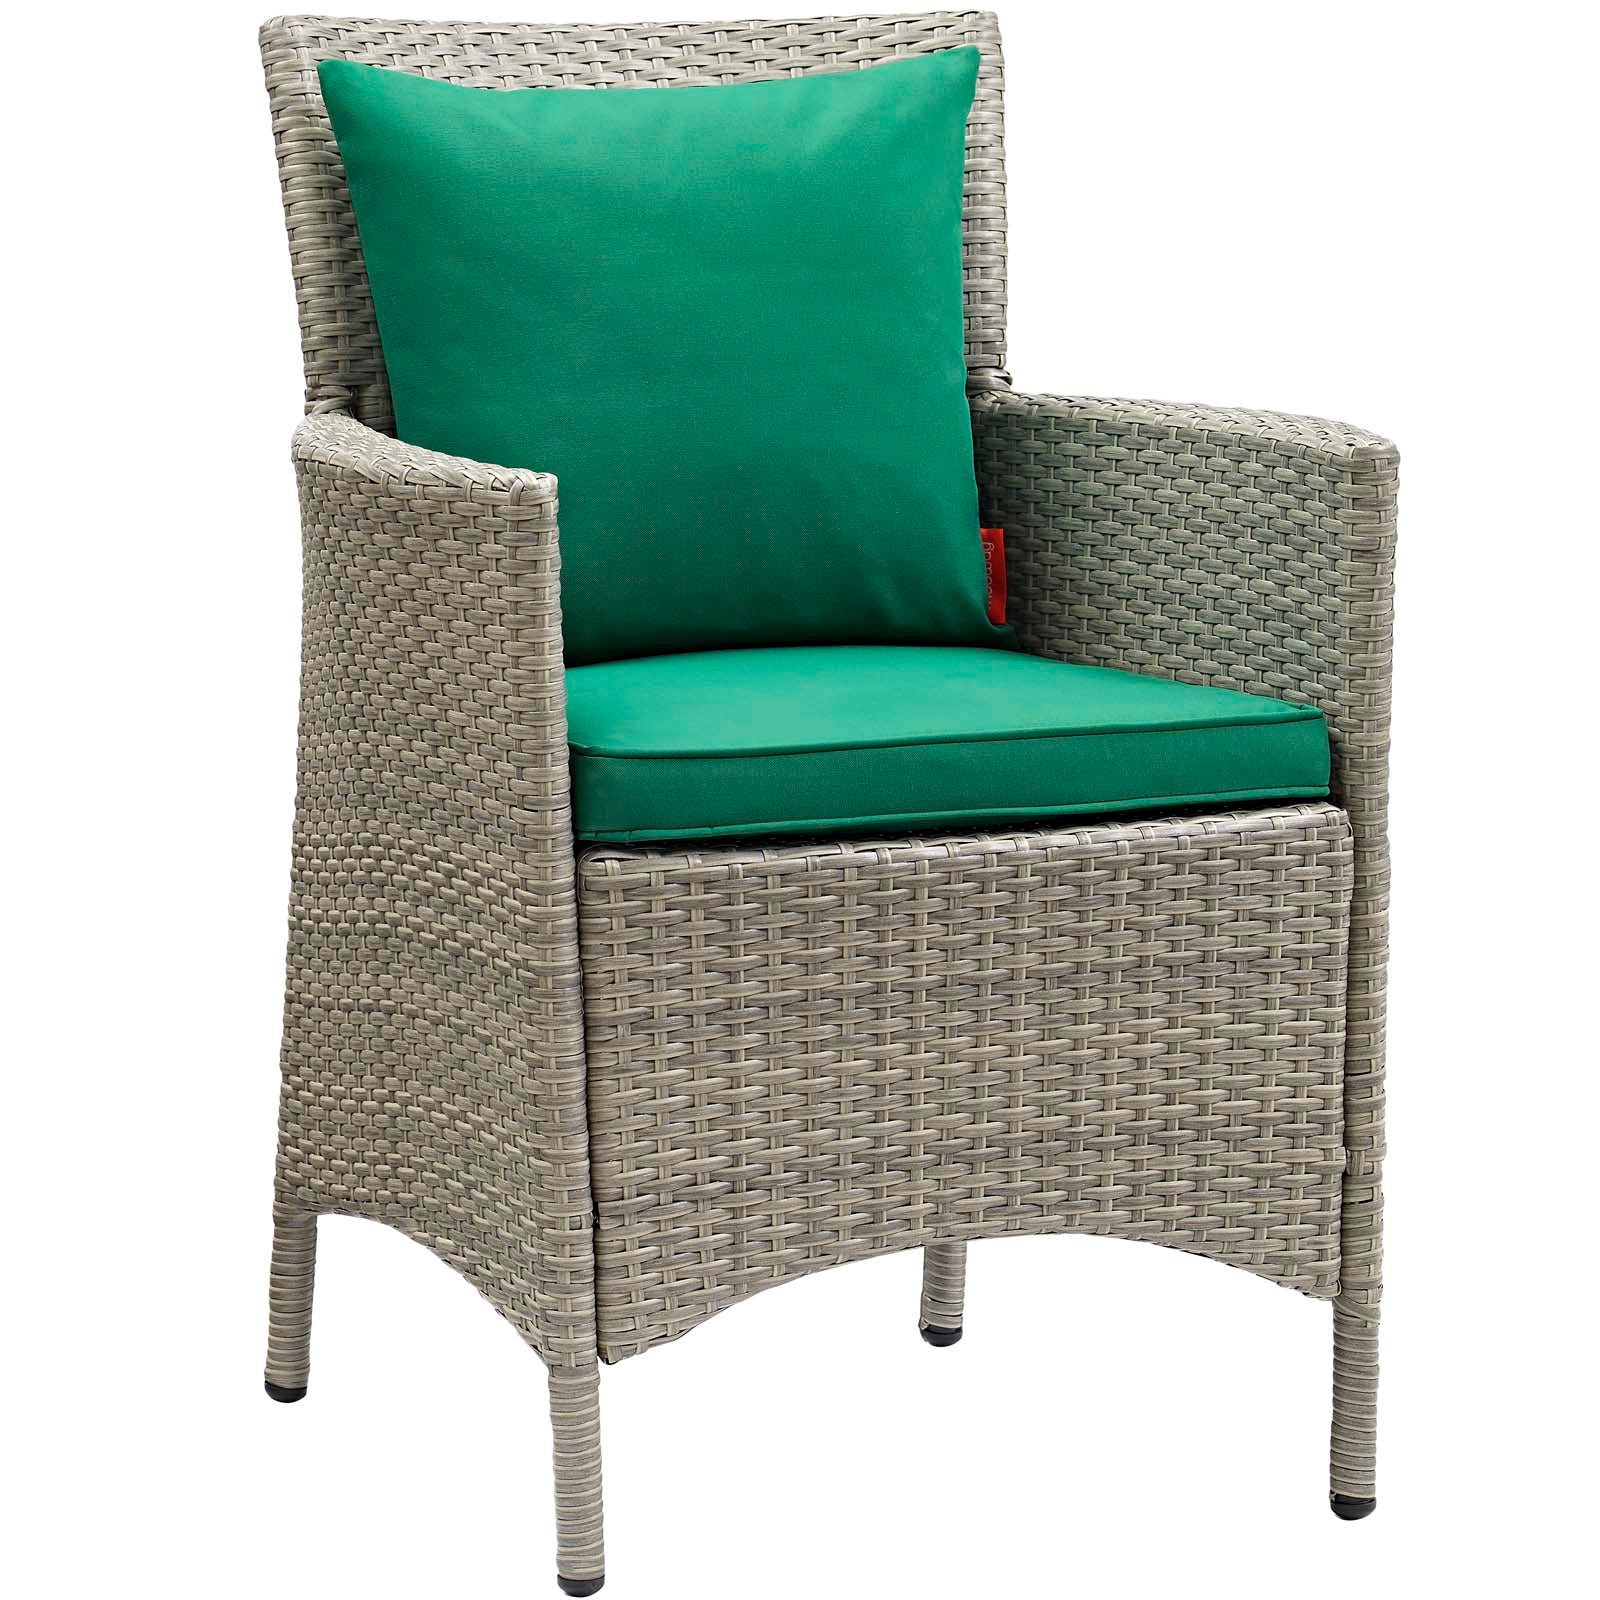 Modway Outdoor Dining Chairs - Conduit Outdoor Patio Wicker Rattan Dining Armchair Light Gray Green